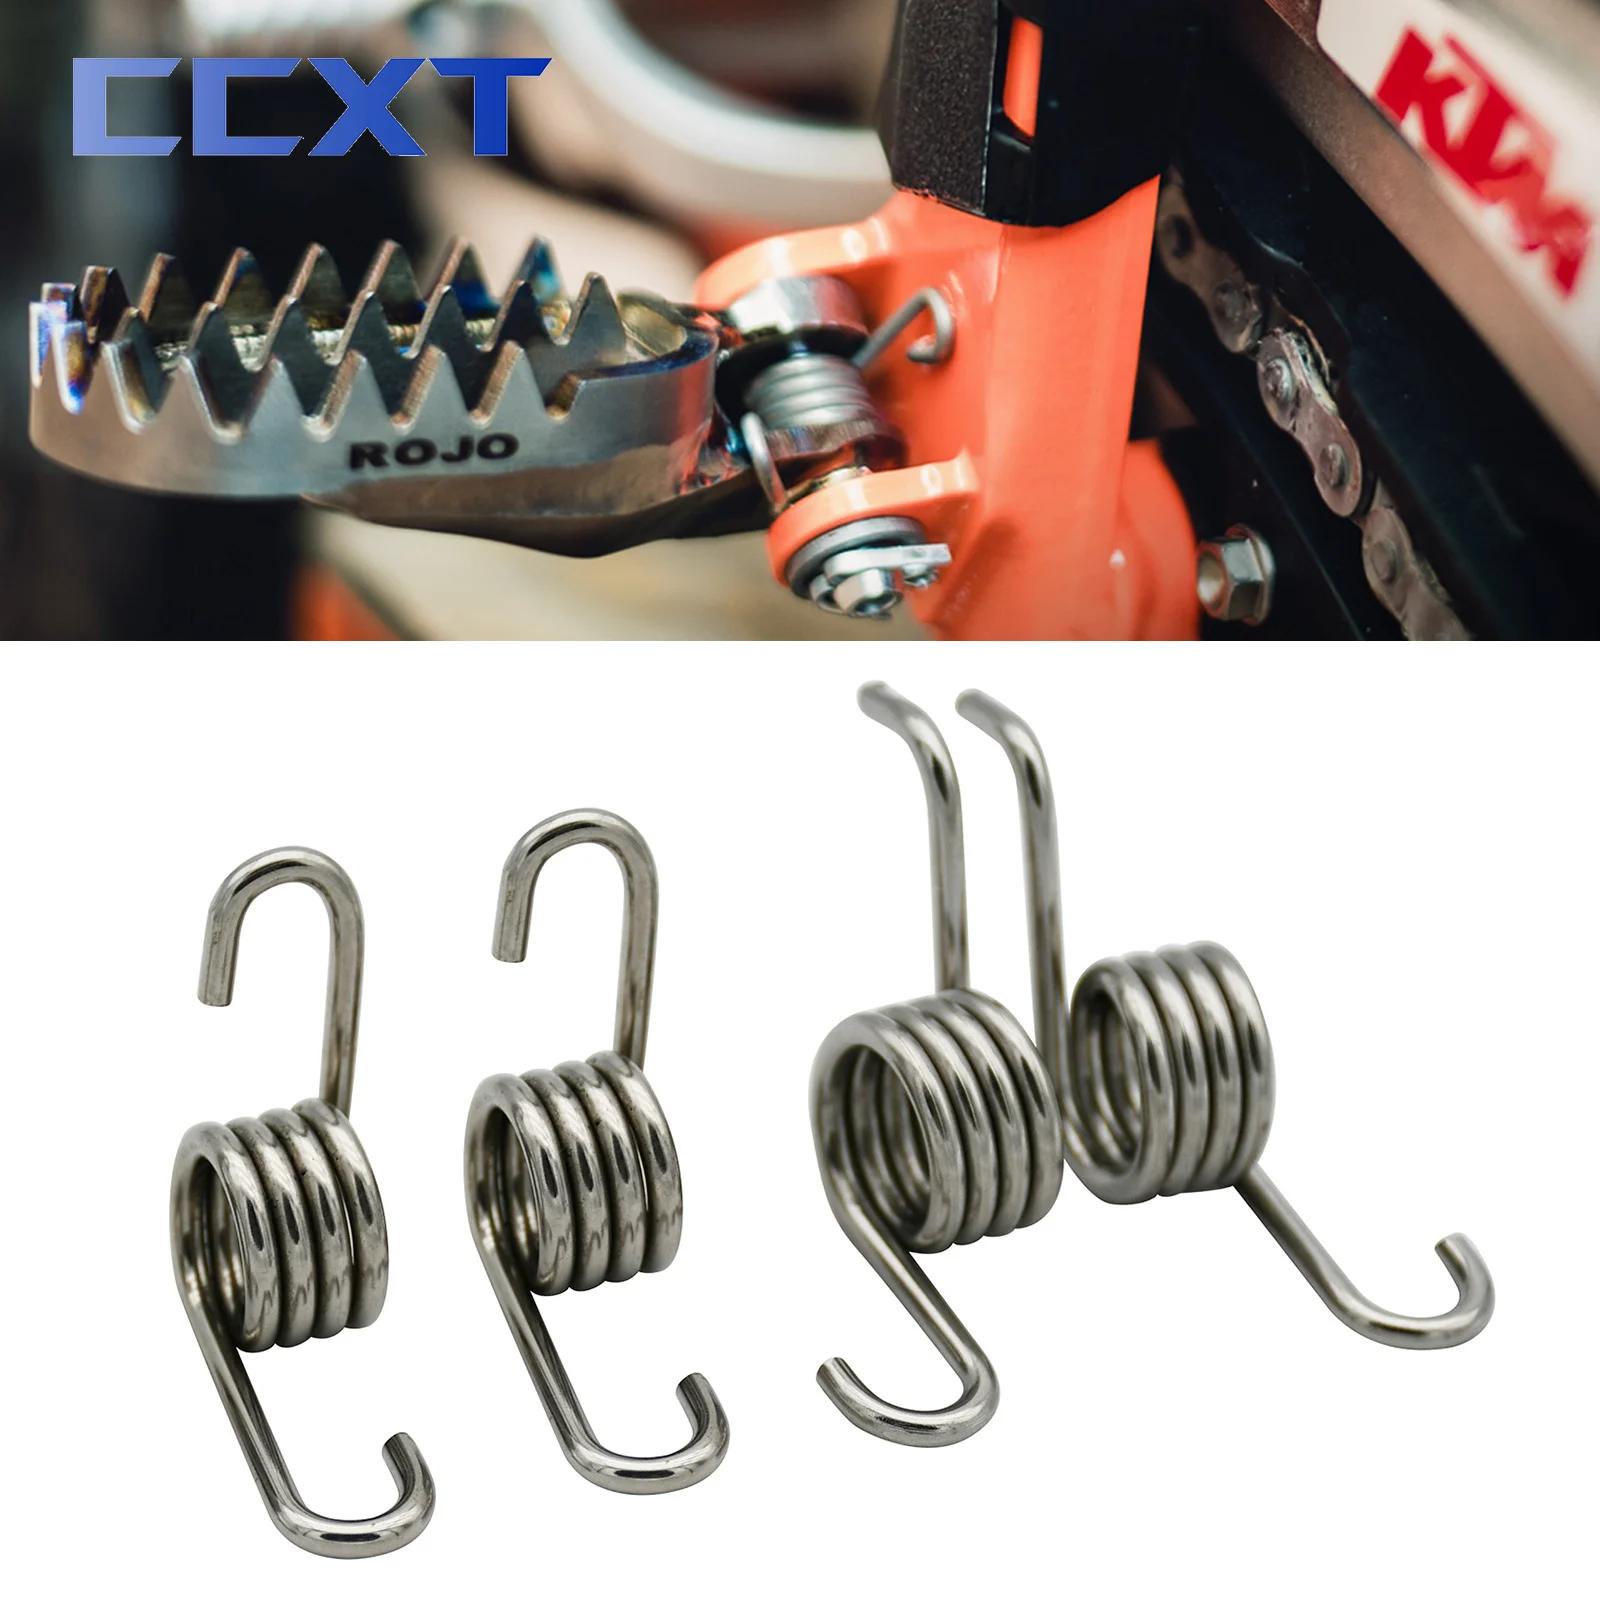 Motorcycle Footpegs Foot Pegs Footrest Spring For KTM SX SXF EXC EXC XC ... - $7.93